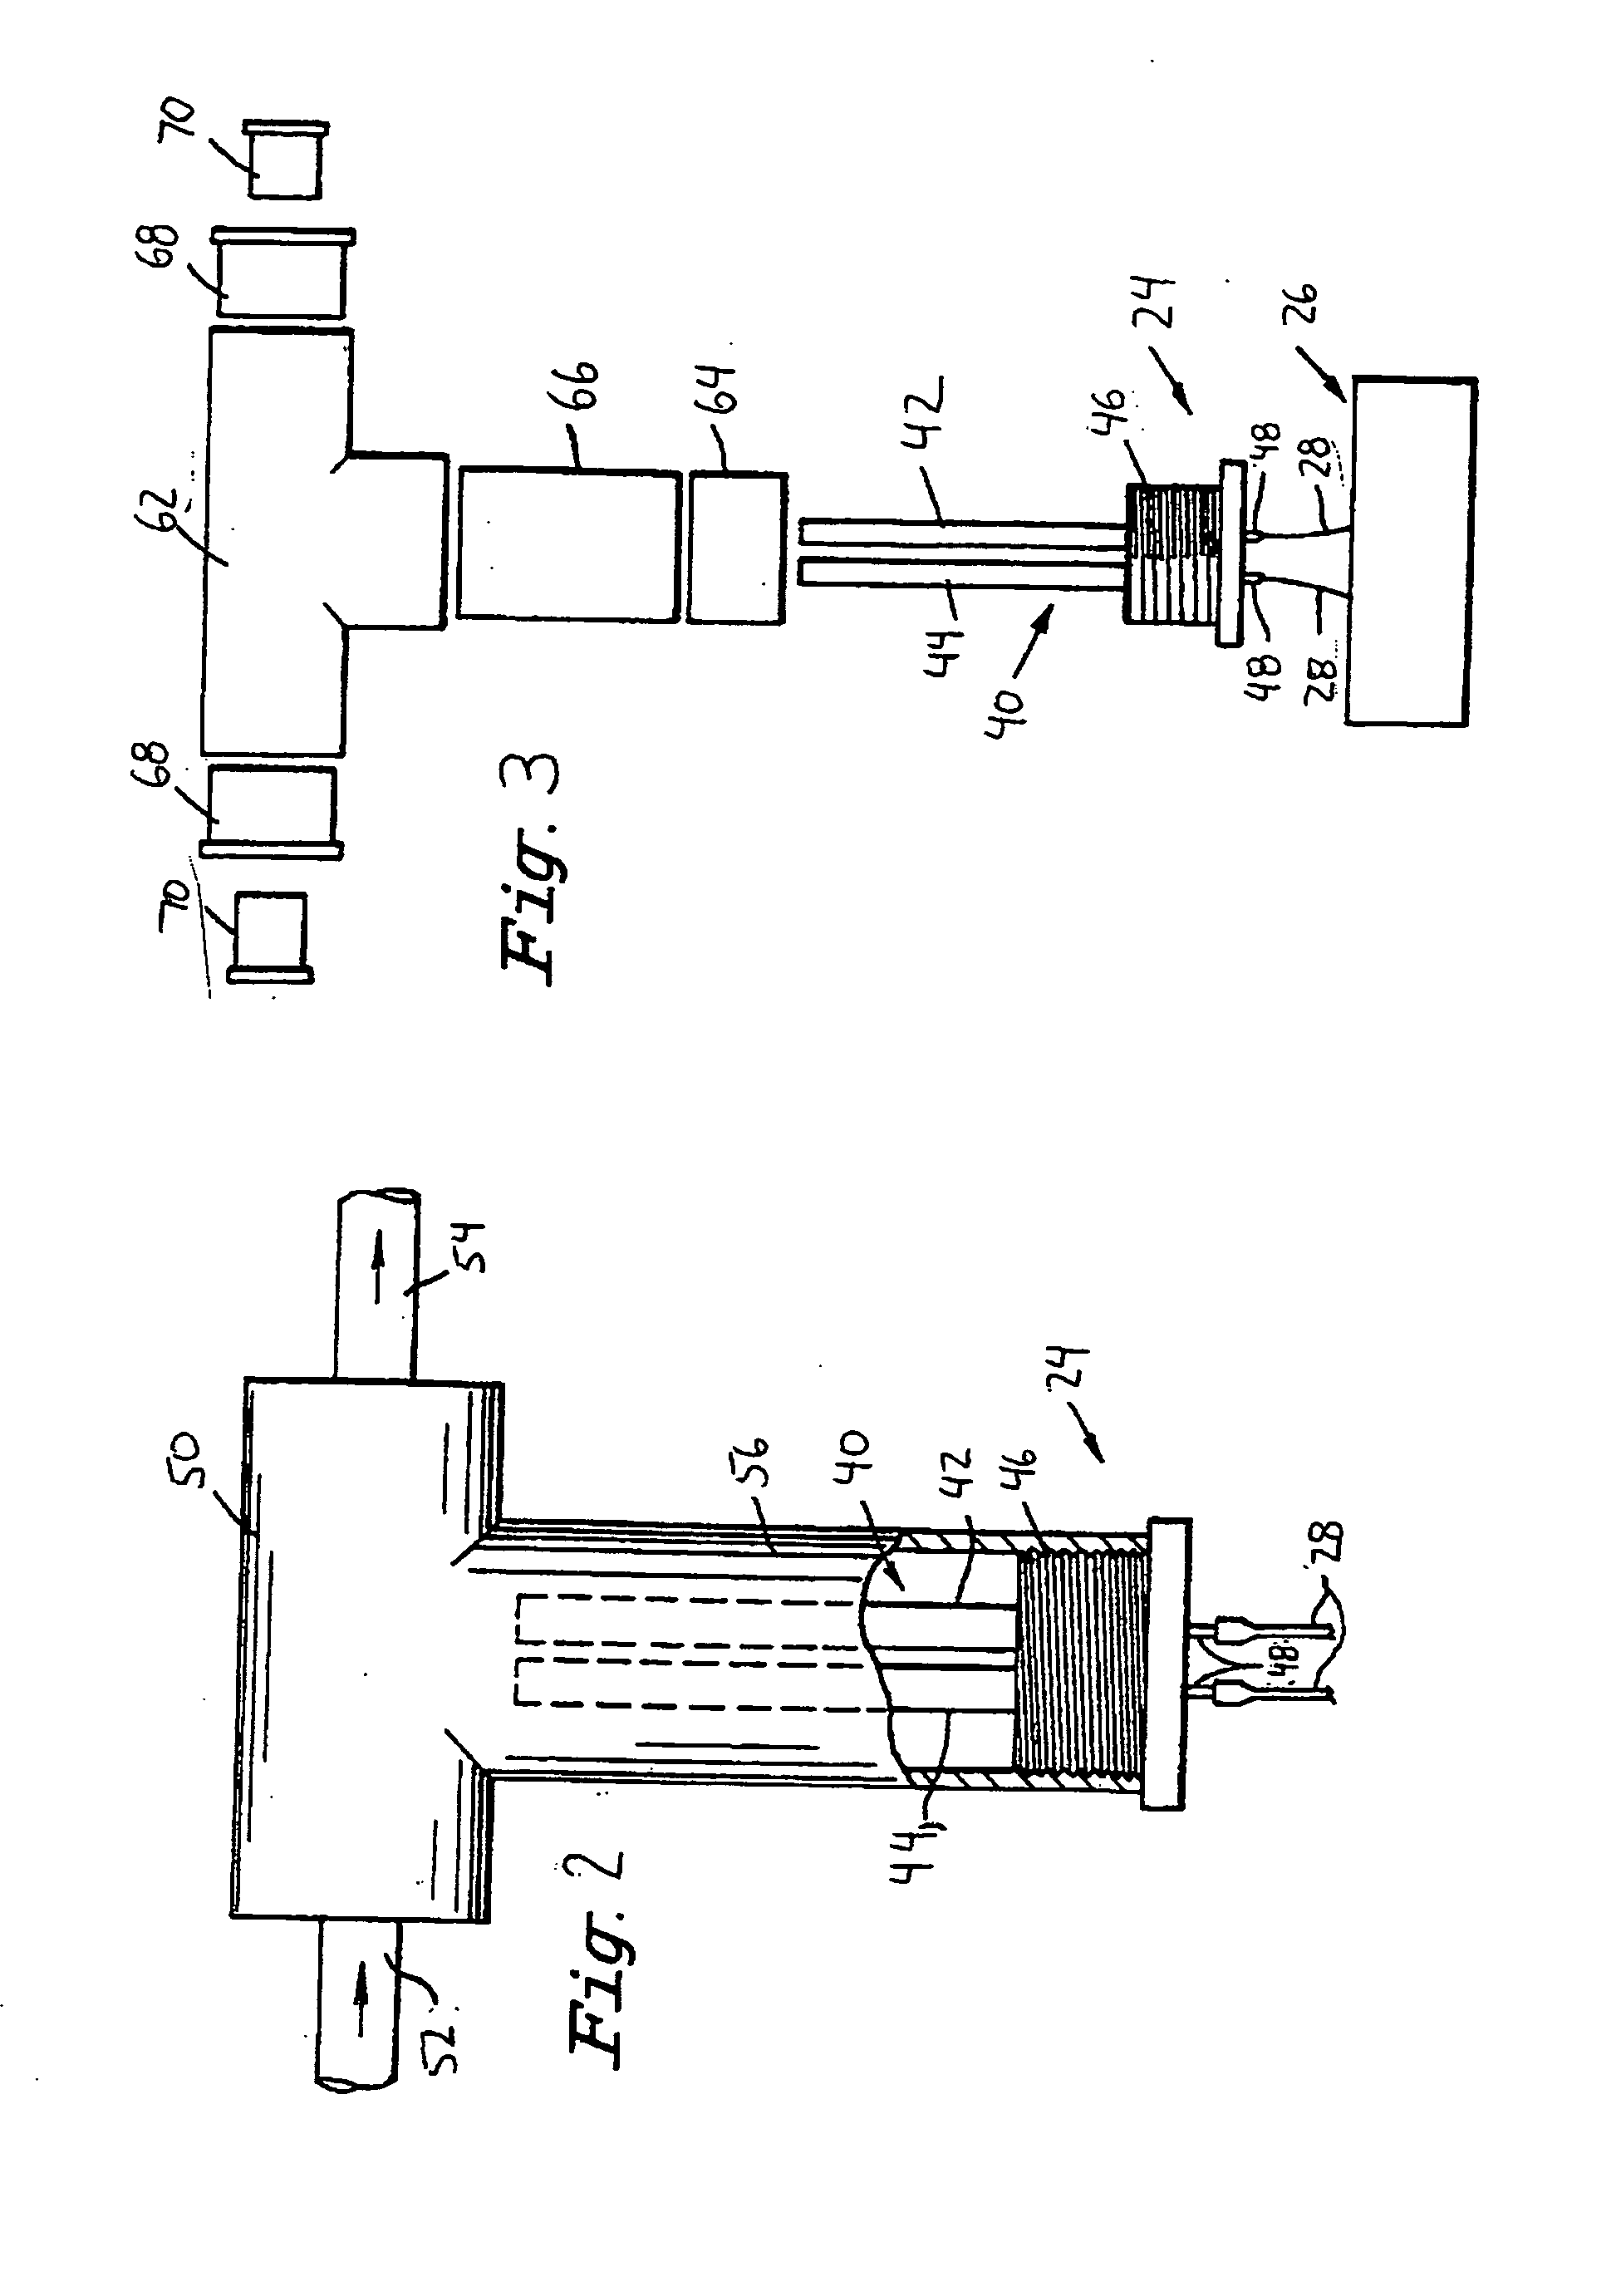 Recreational spas, bromine generators for water treatment, and related methods